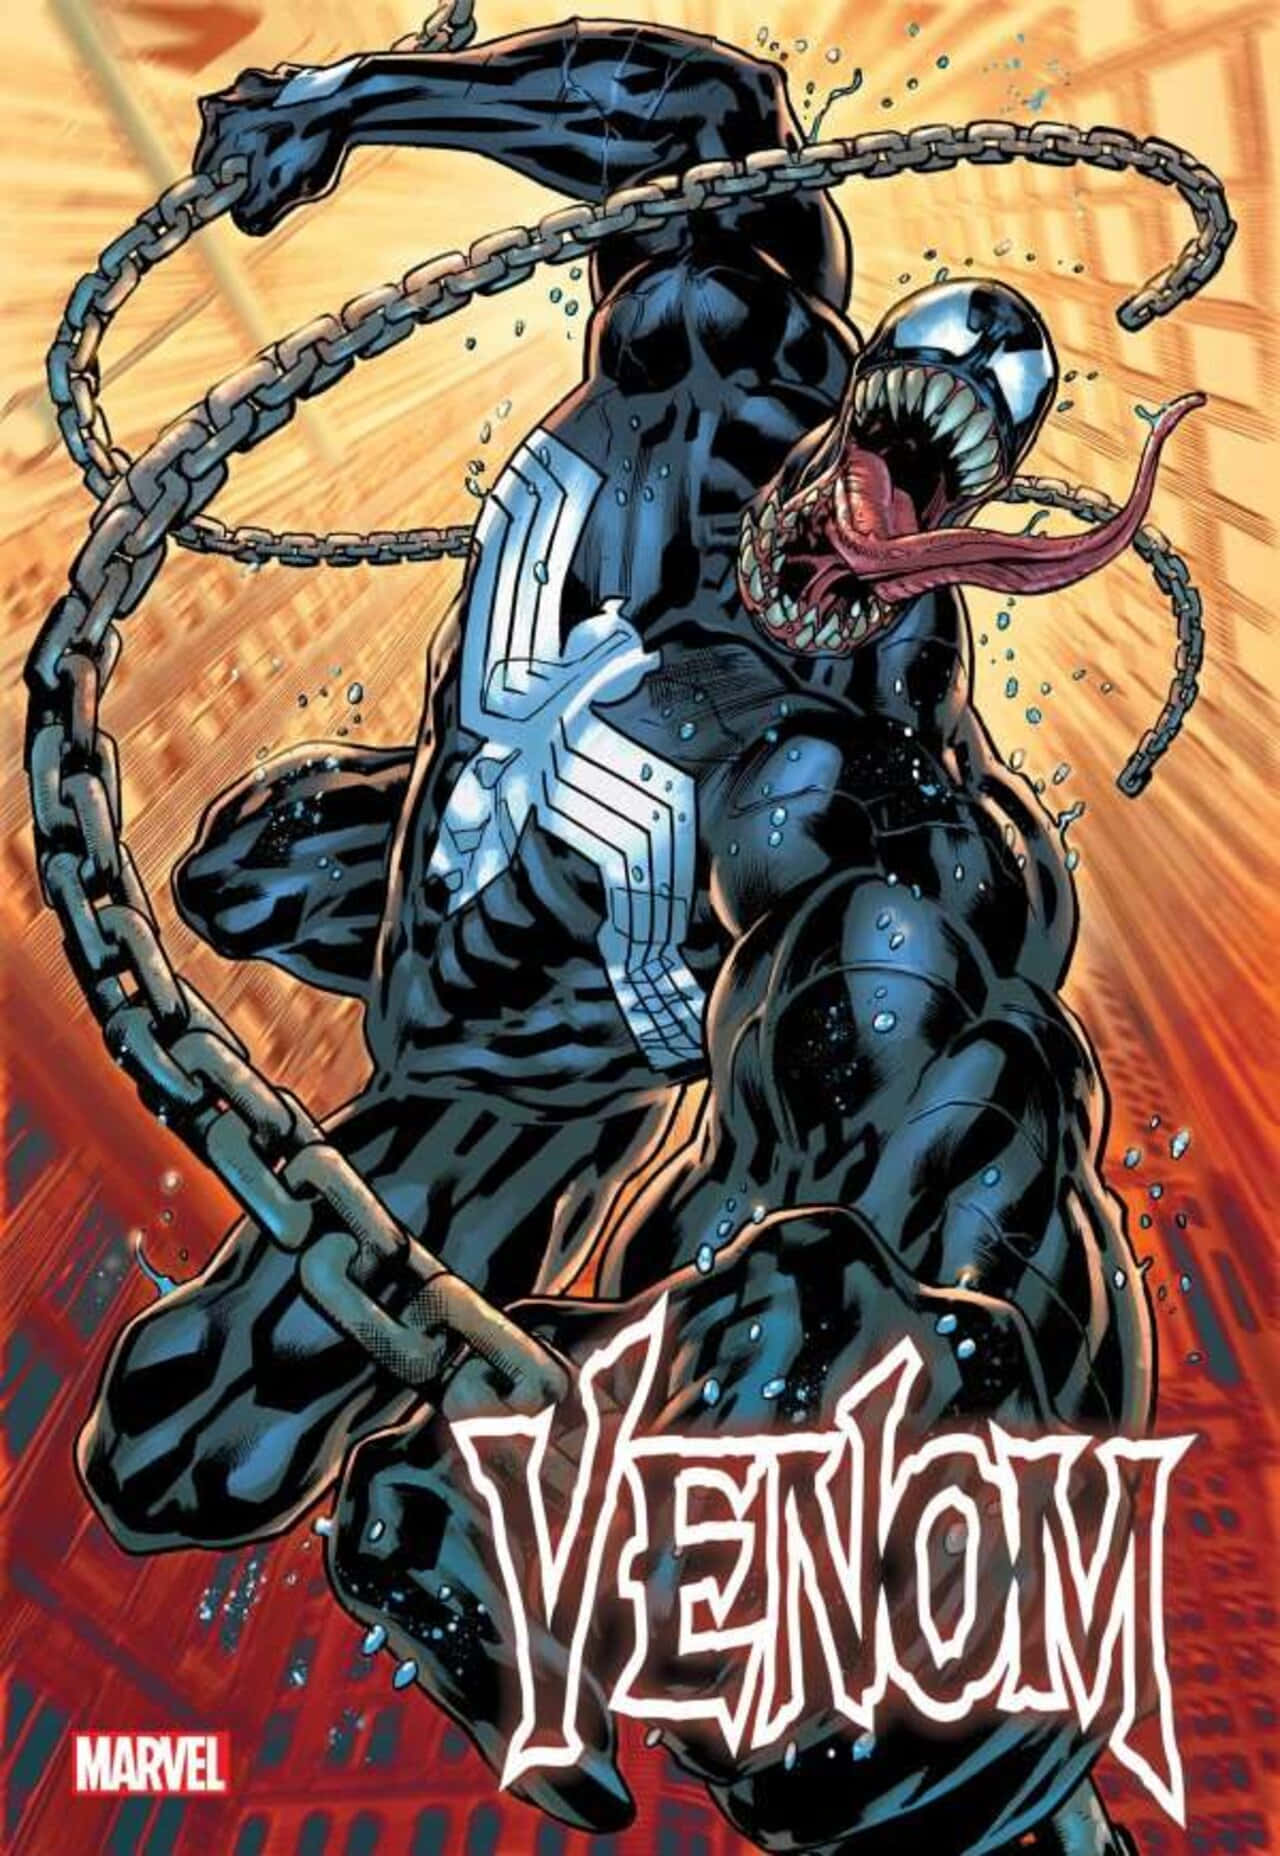 Venomized from Marvel Universe takes over Wallpaper